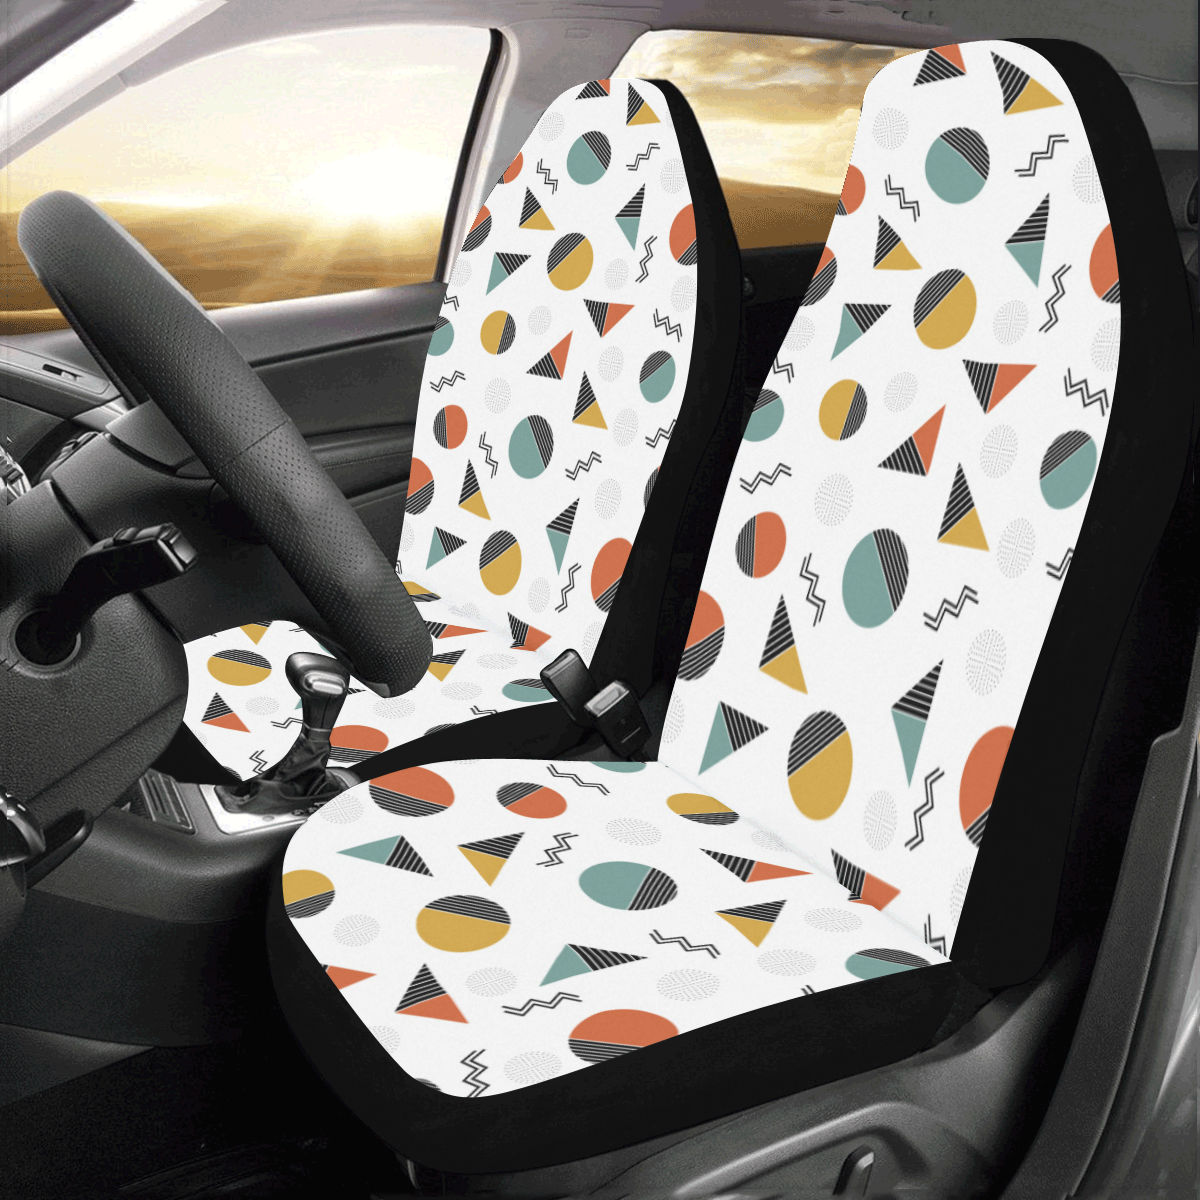 Geo Cutting Shapes Car Seat Covers (Set of 2)